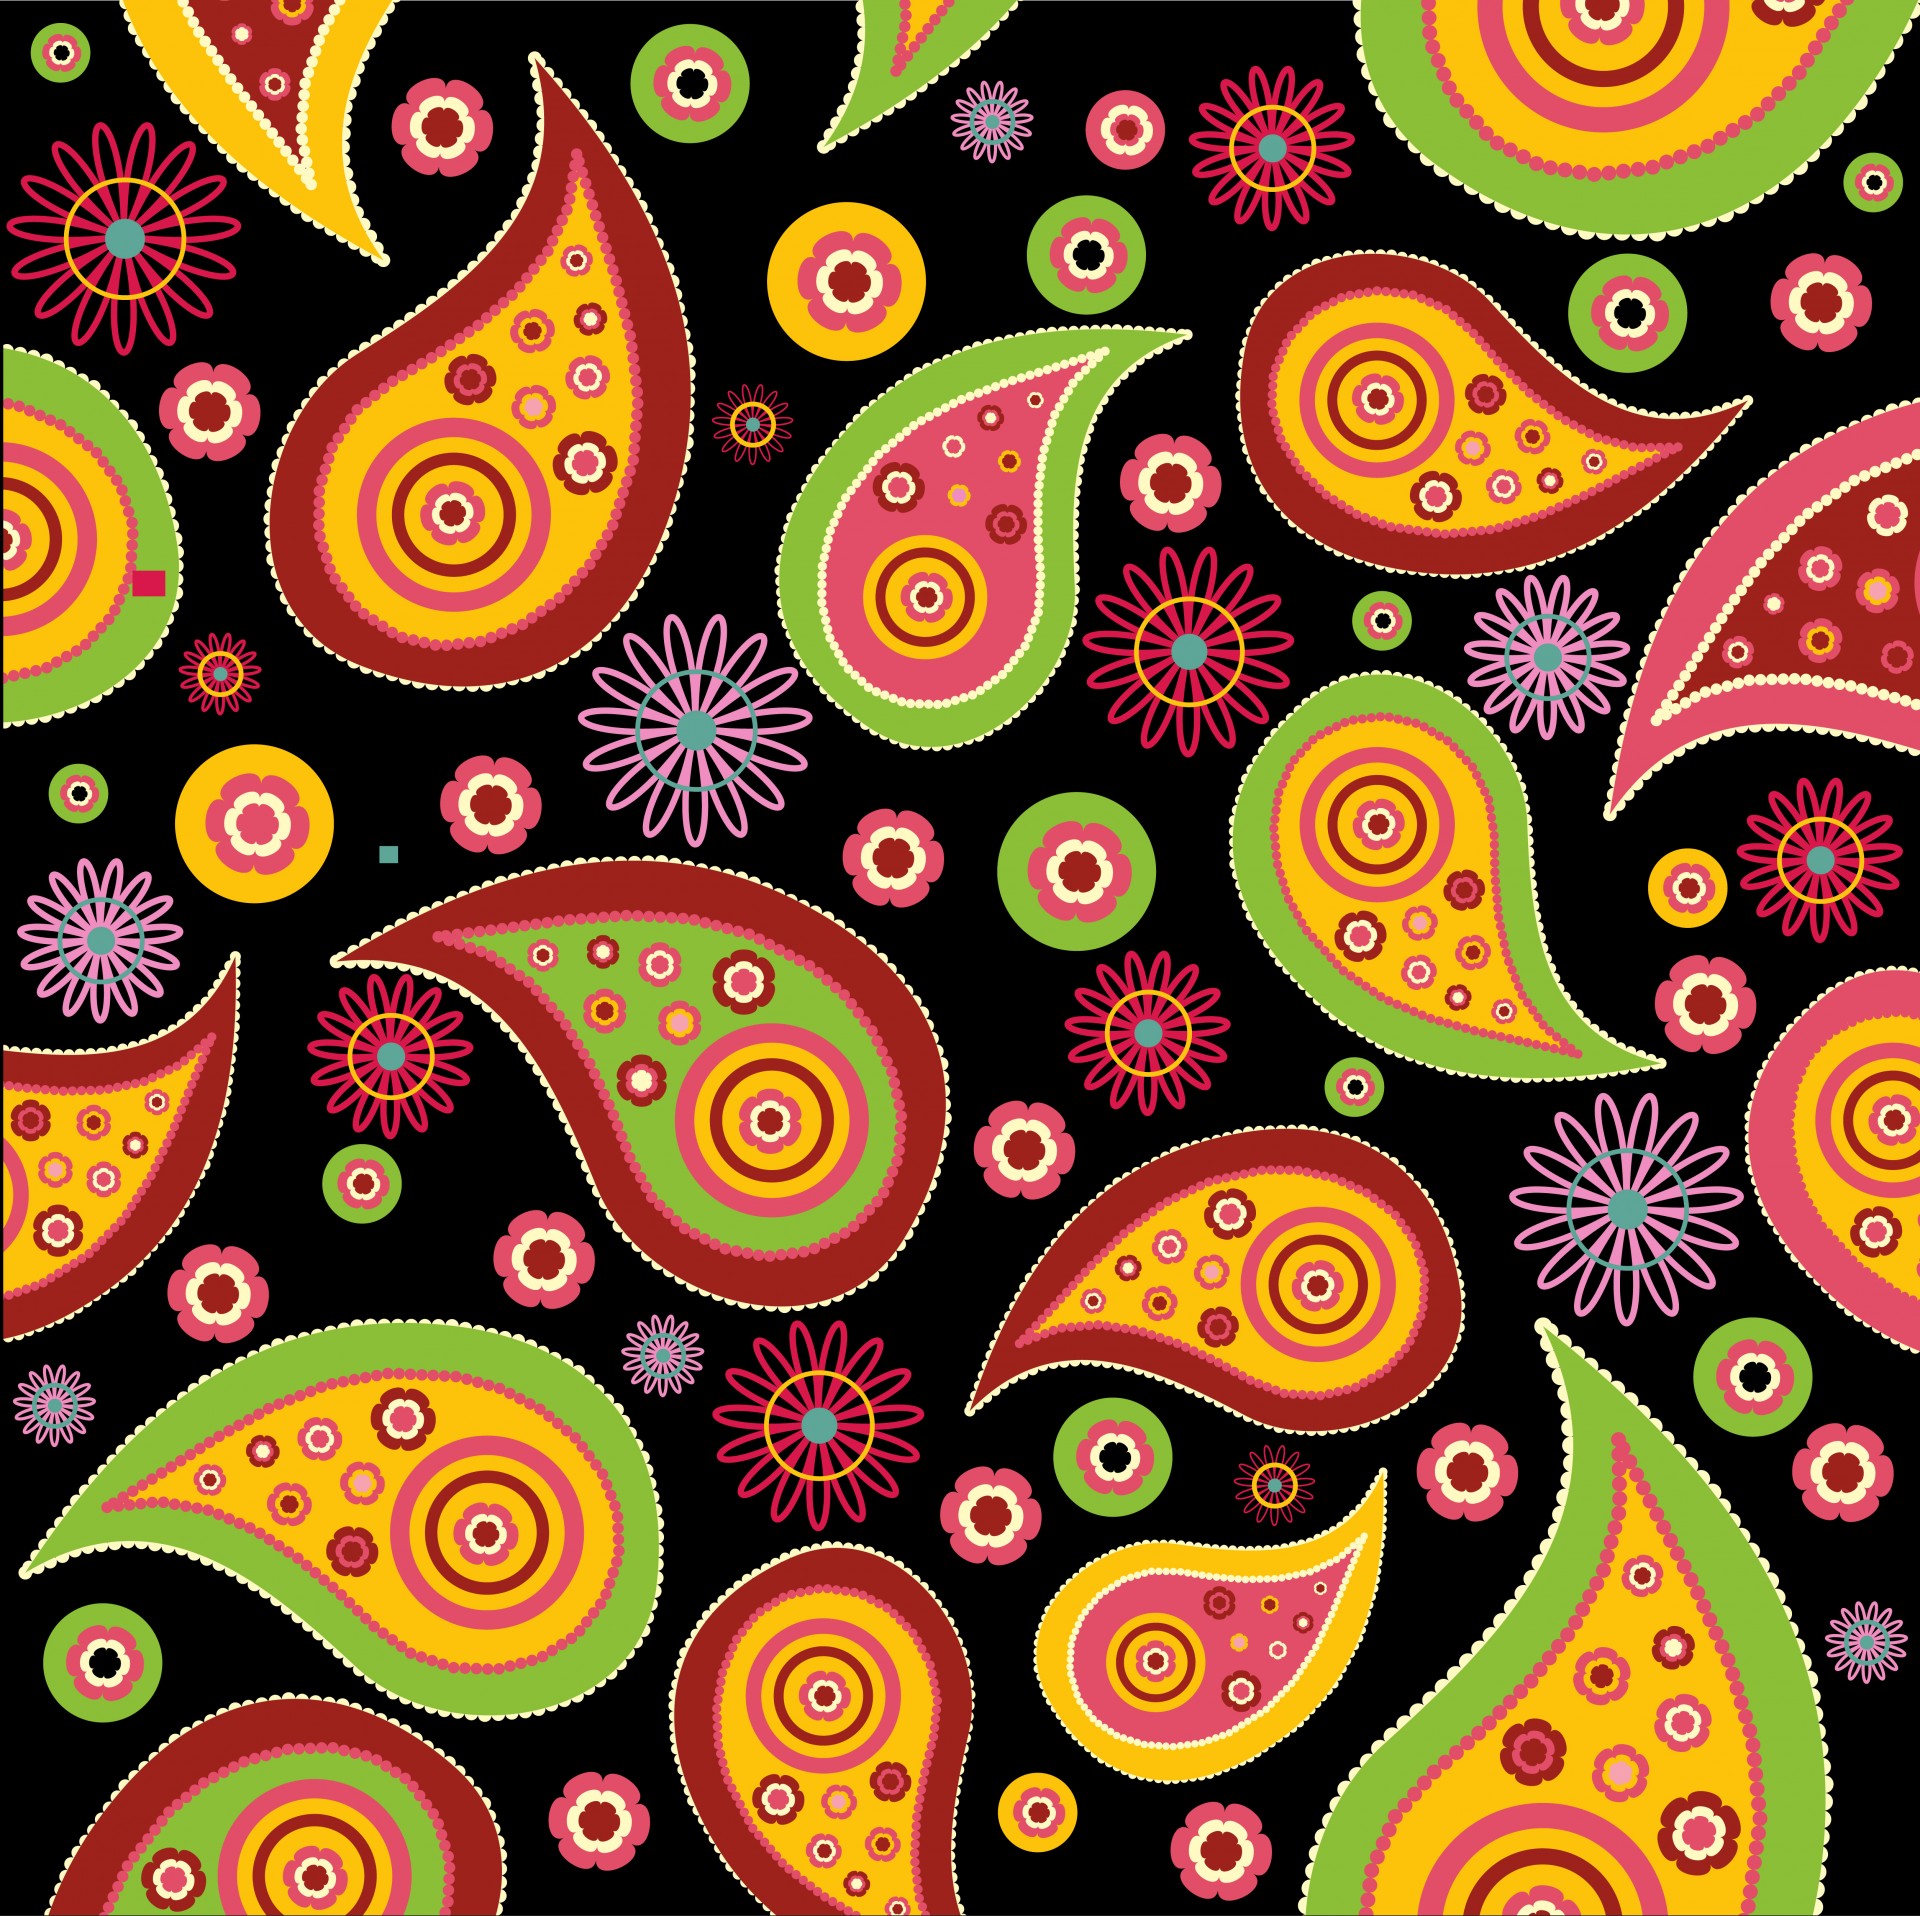 Paisley Splashes HD Wallpaper for Android